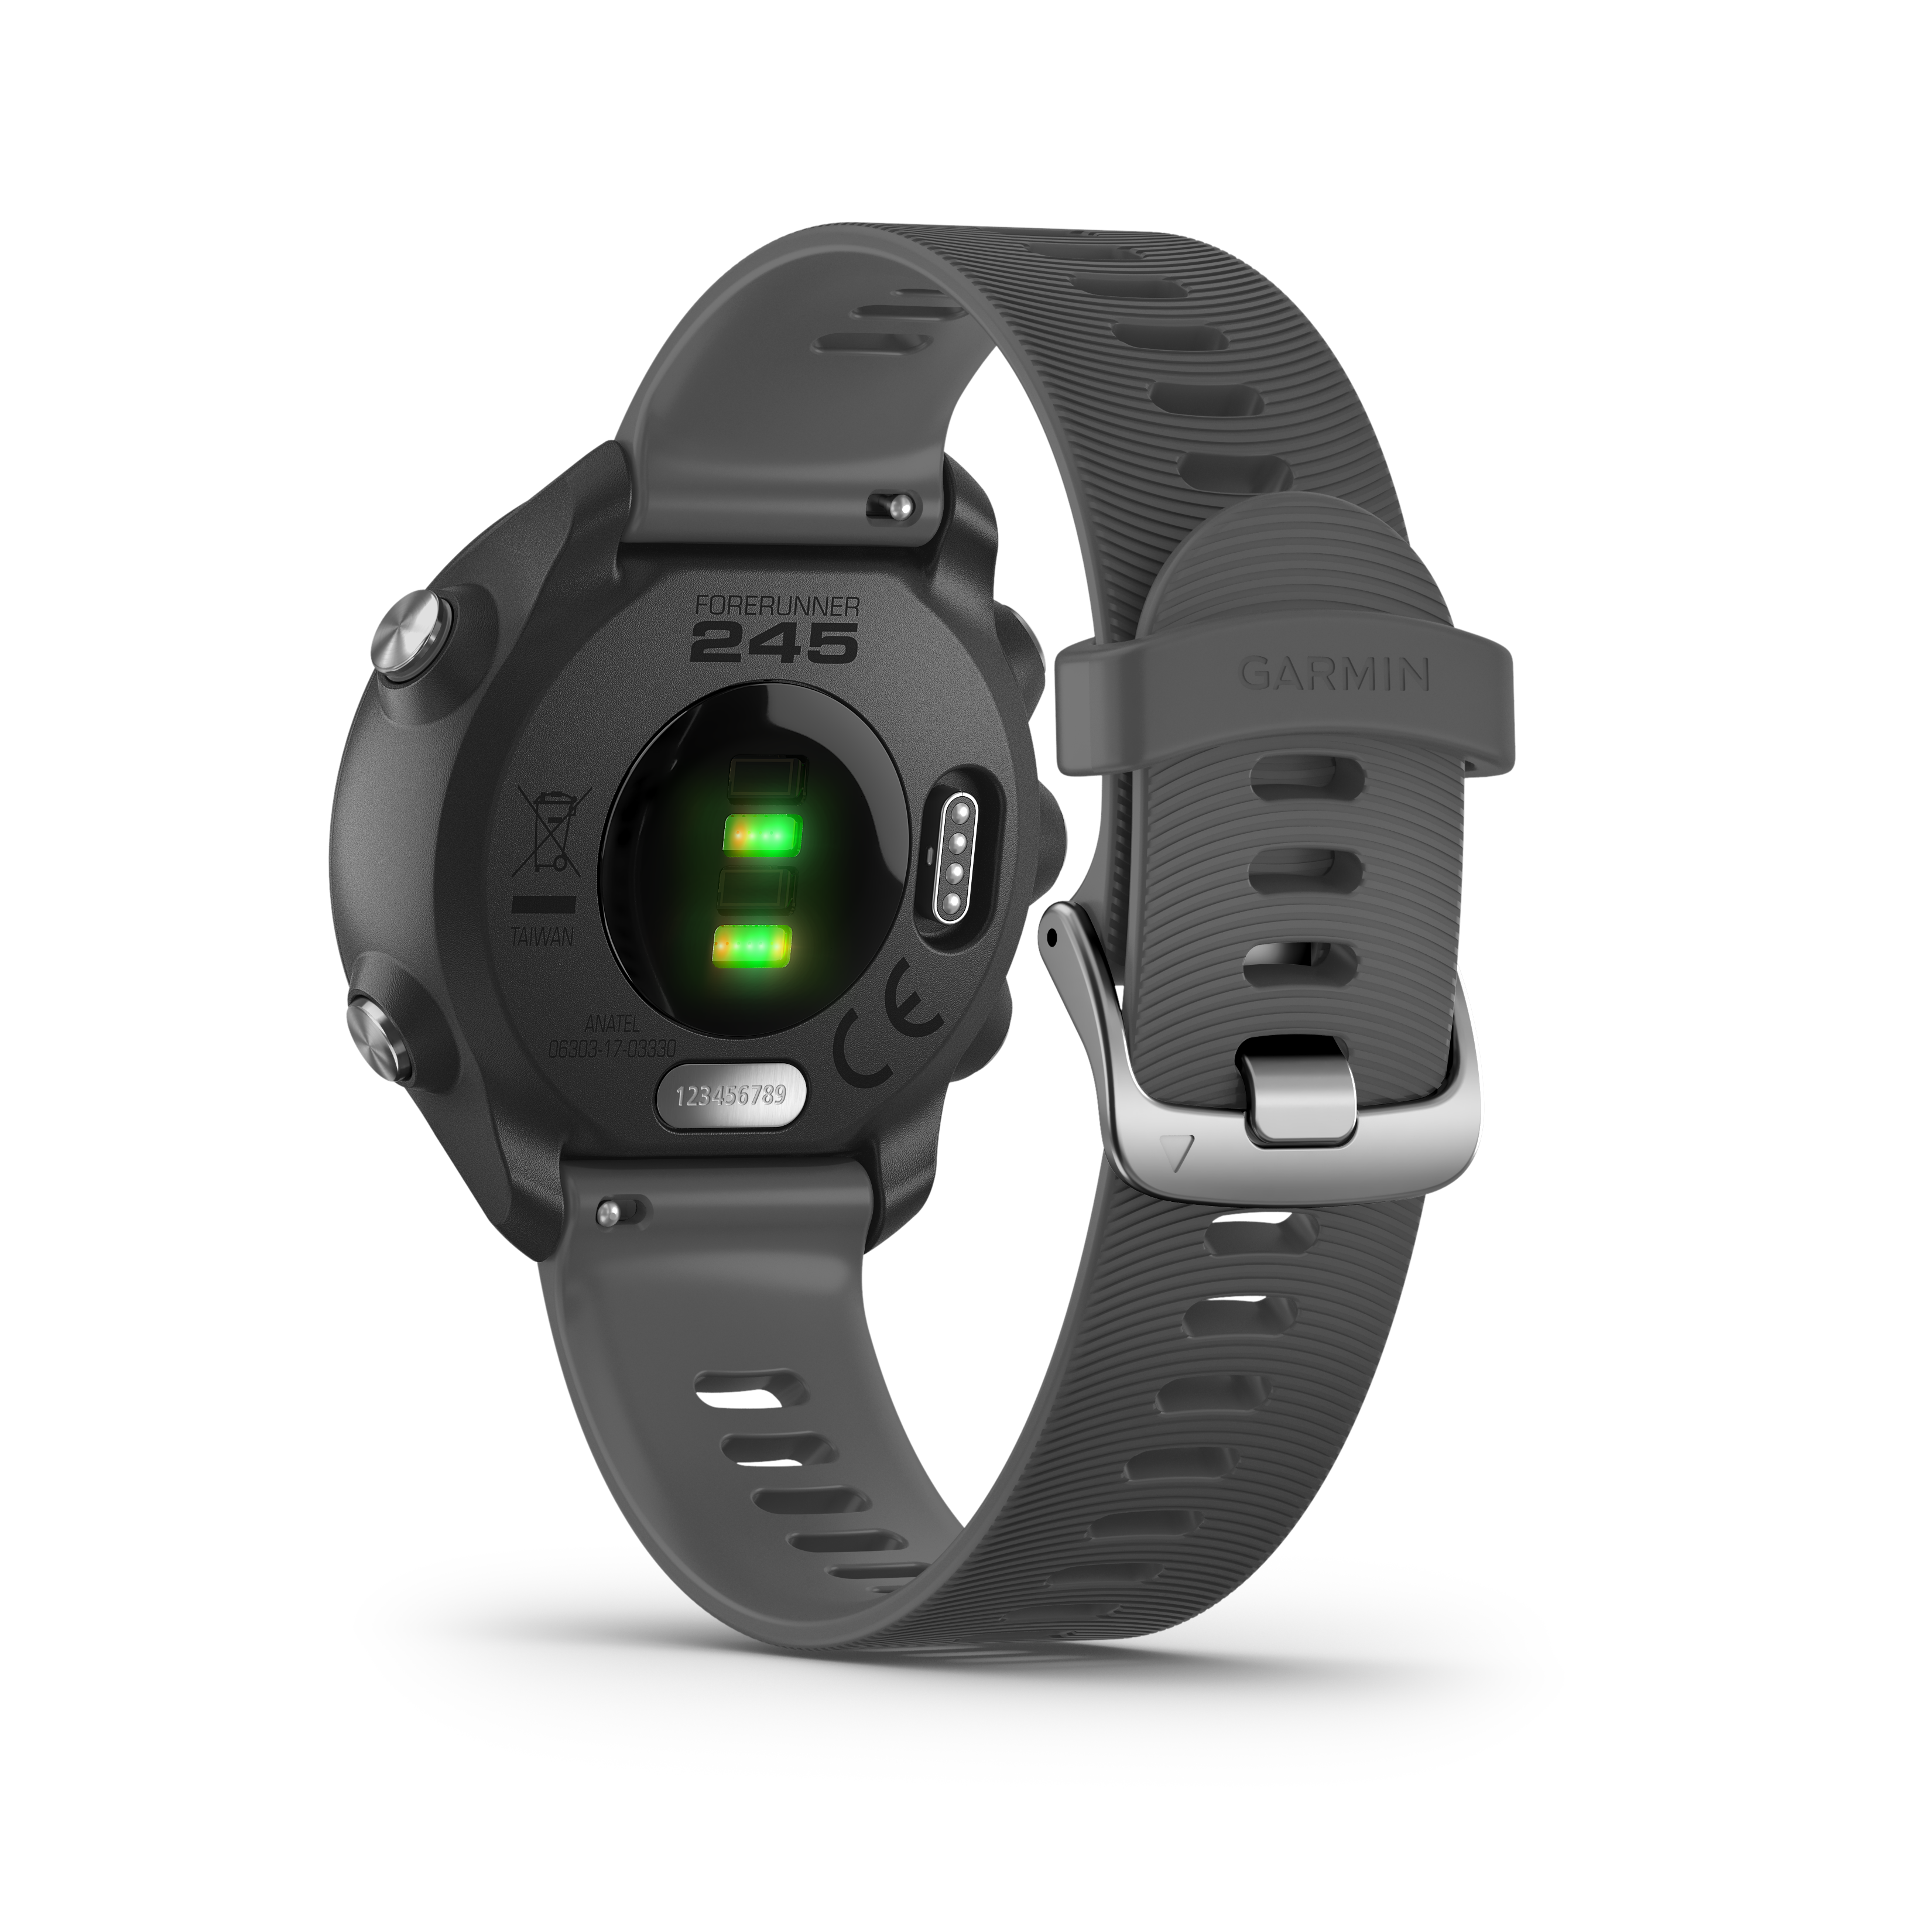 This is a view of the backside of the Gramin watch. You do the running. Forerunner® 245 does the thinking. This GPS running smartwatch evaluates performance stats such as VO2 max, aerobic and anaerobic training effect, and training status, which indicates if you’re undertraining or overdoing it. You can also track advanced running dynamics1 such as ground contact time balance and stride length. Take the guesswork out of training for your next 5K when you team this watch with the Garmin Coach app.